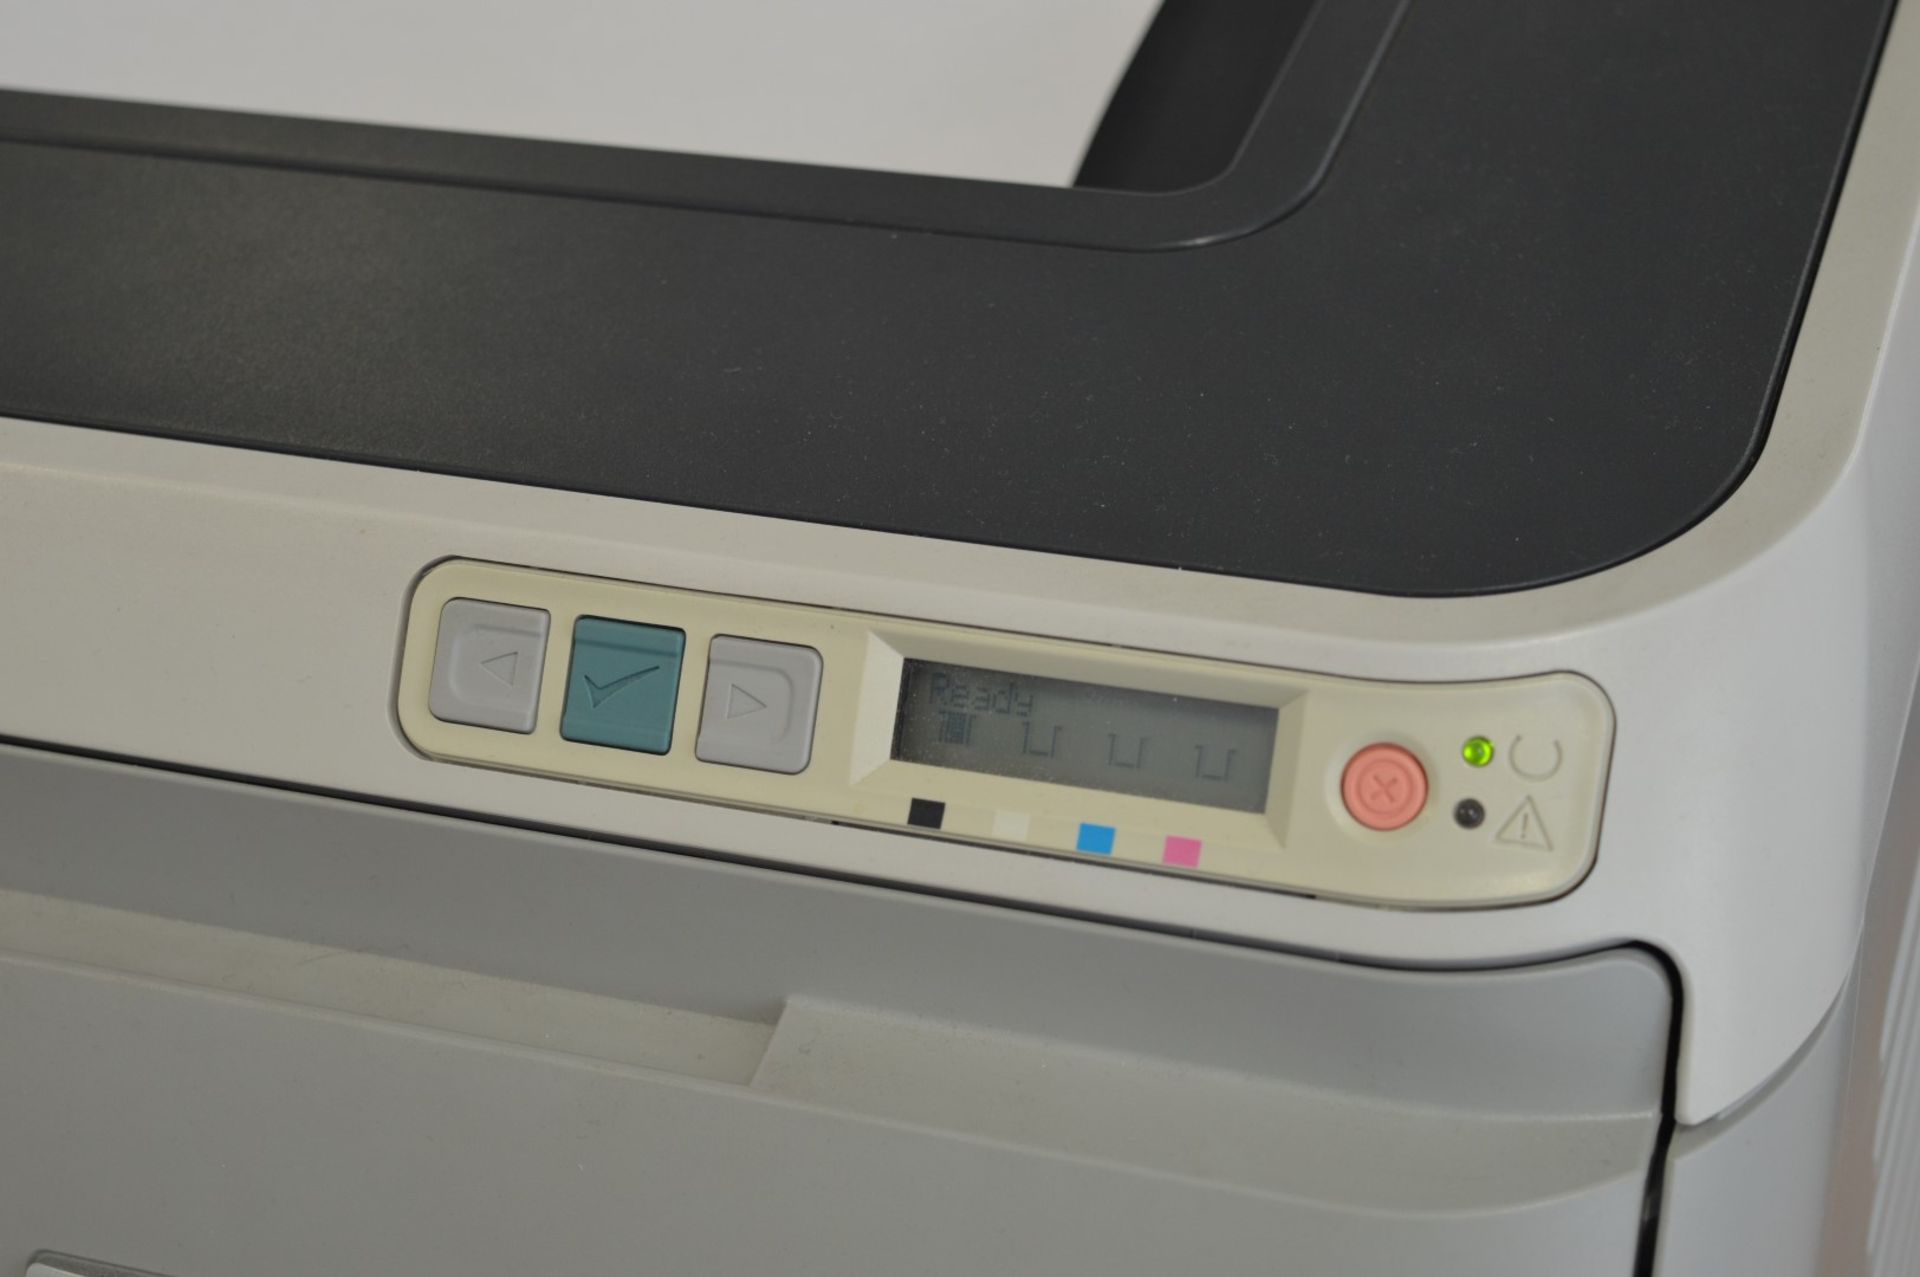 1 x HP Colour Laserjet Office Printer - Model 2600n - From Working Office Environment - Quickly - Image 3 of 3